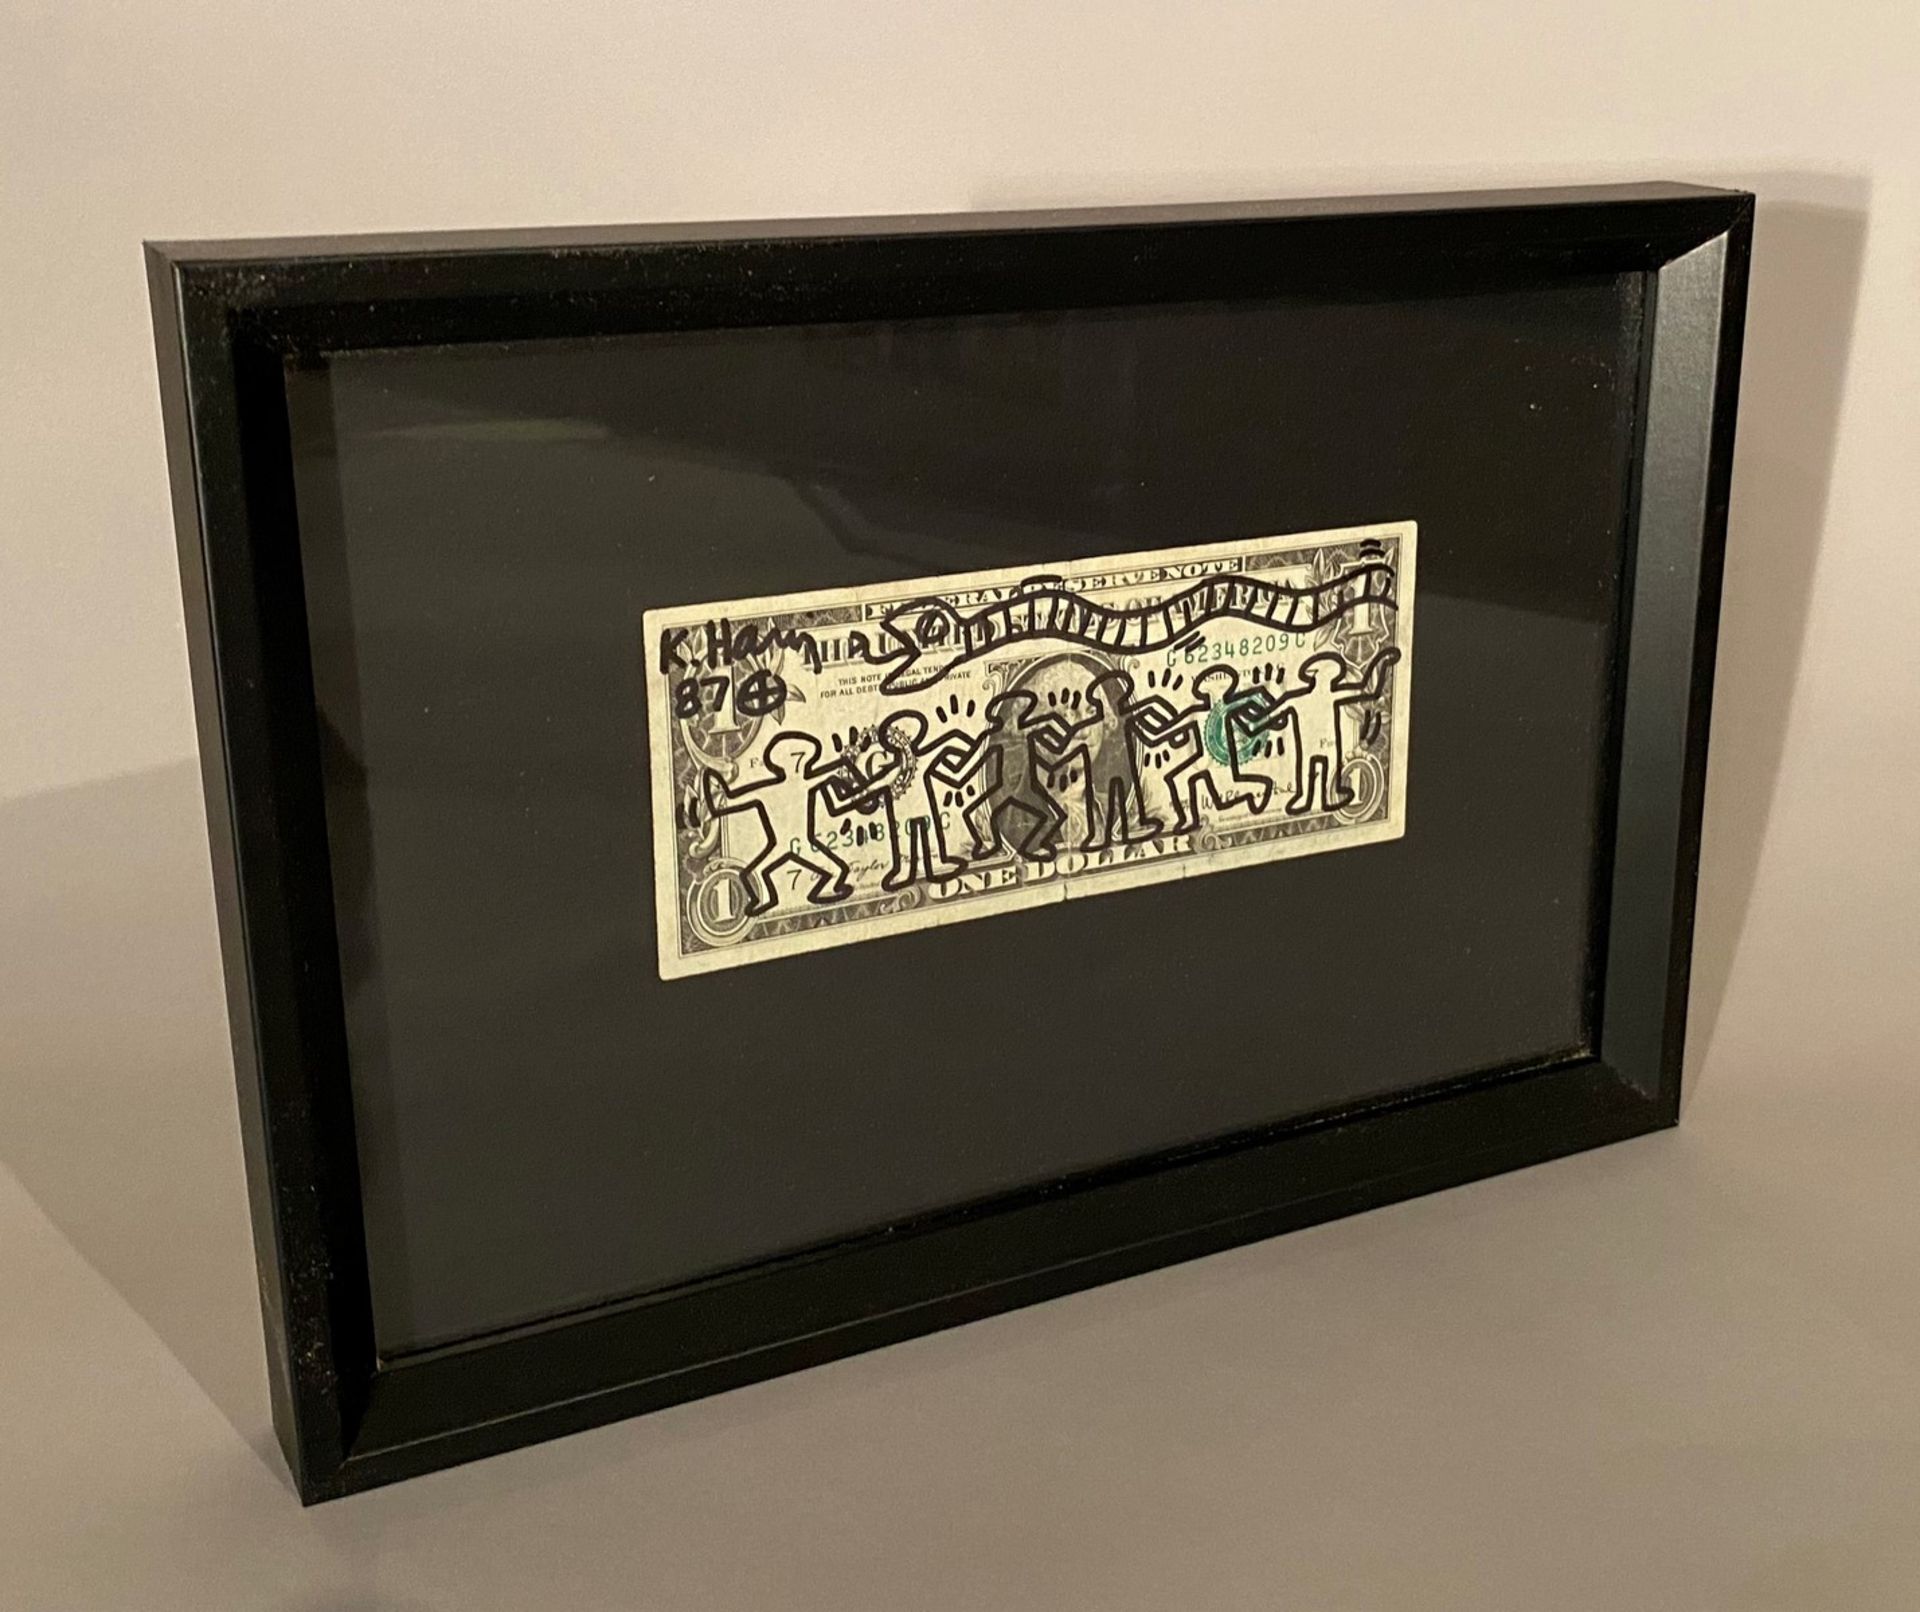 Keith HARING (1958-1990) - Image 2 of 2